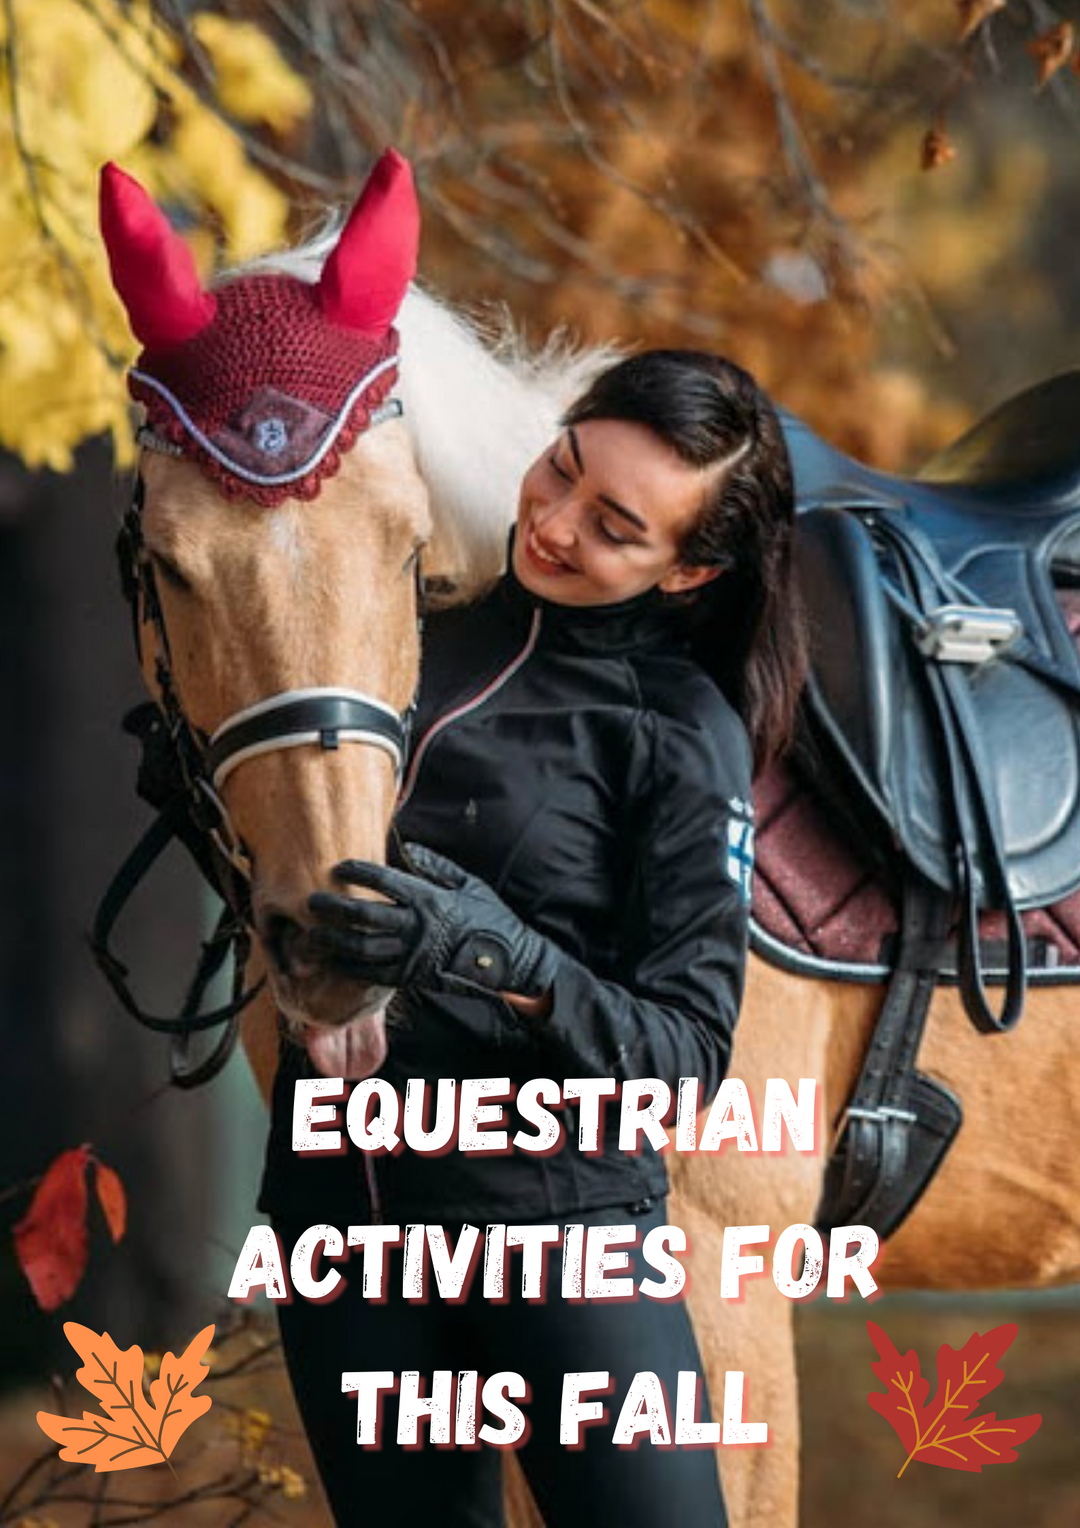 EQUESTRIAN ACTIVITIES FOR THIS FALL